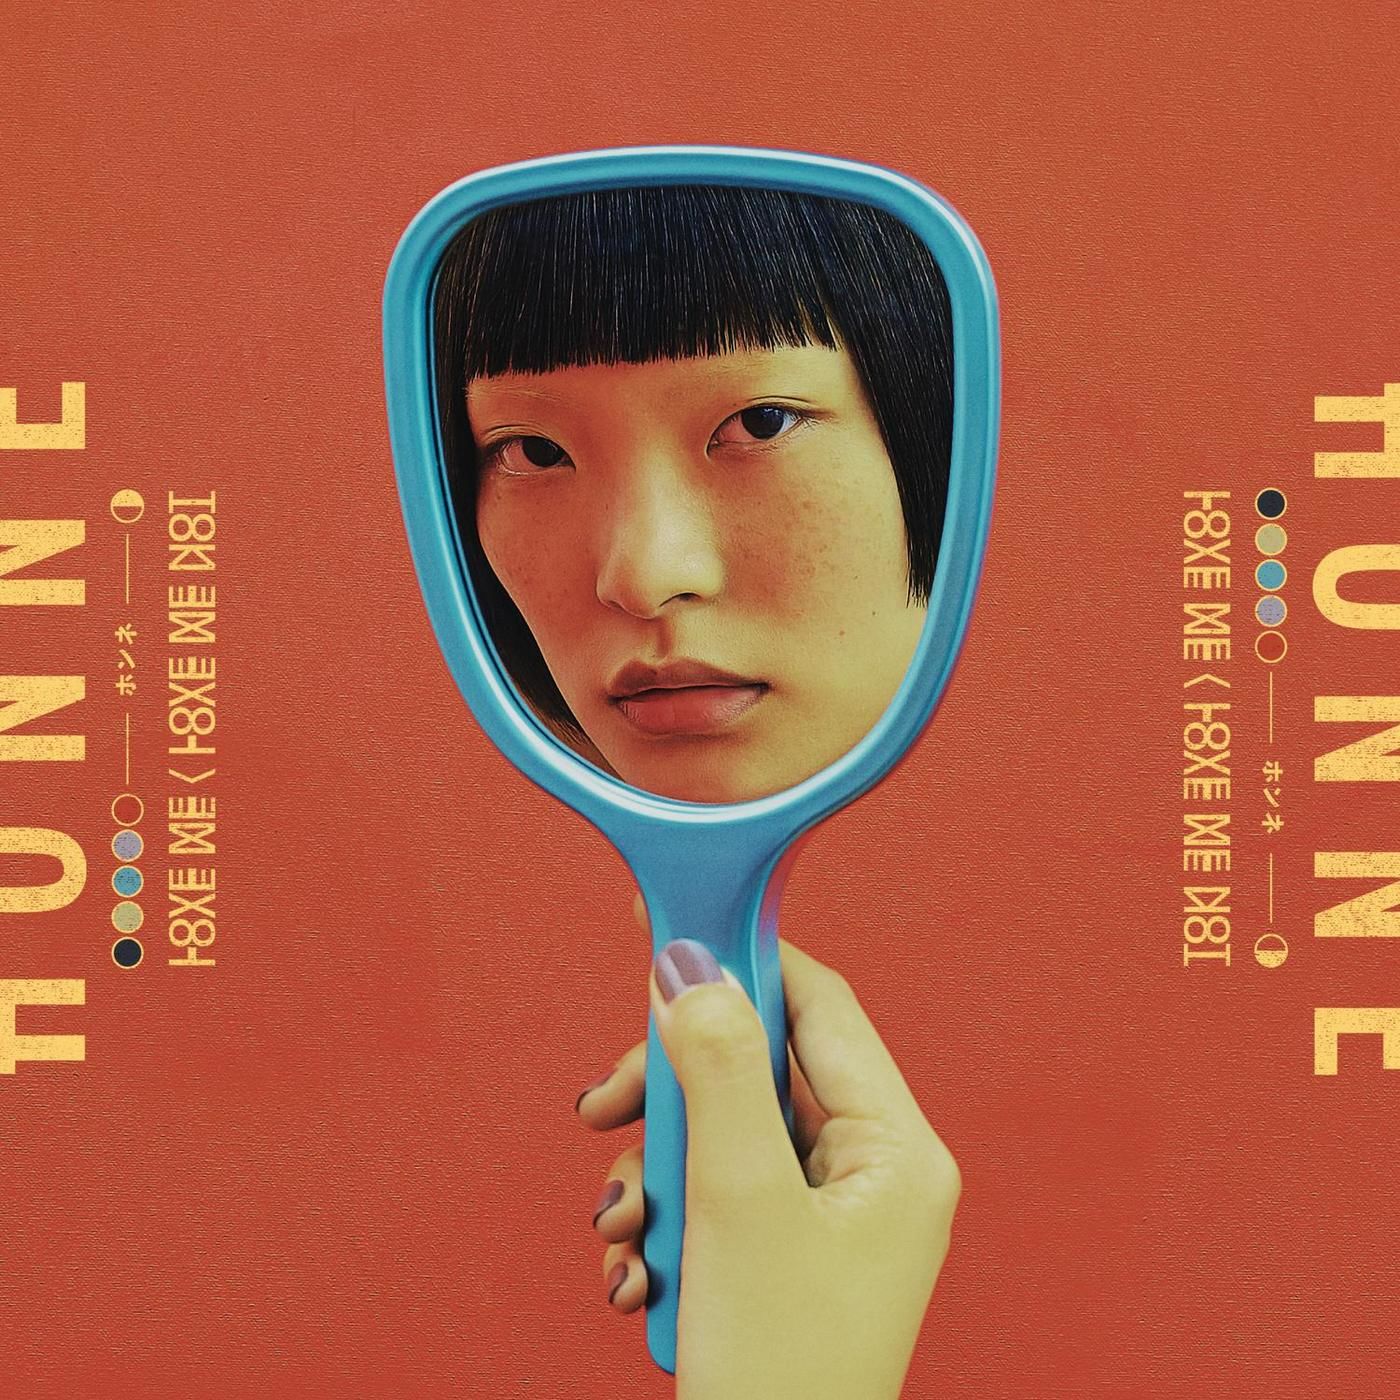 HONNE - Feels So Good ◑ (Feat. Anna of the Notrh) (잔잔, 신비, 따뜻, 비트, 일렉)